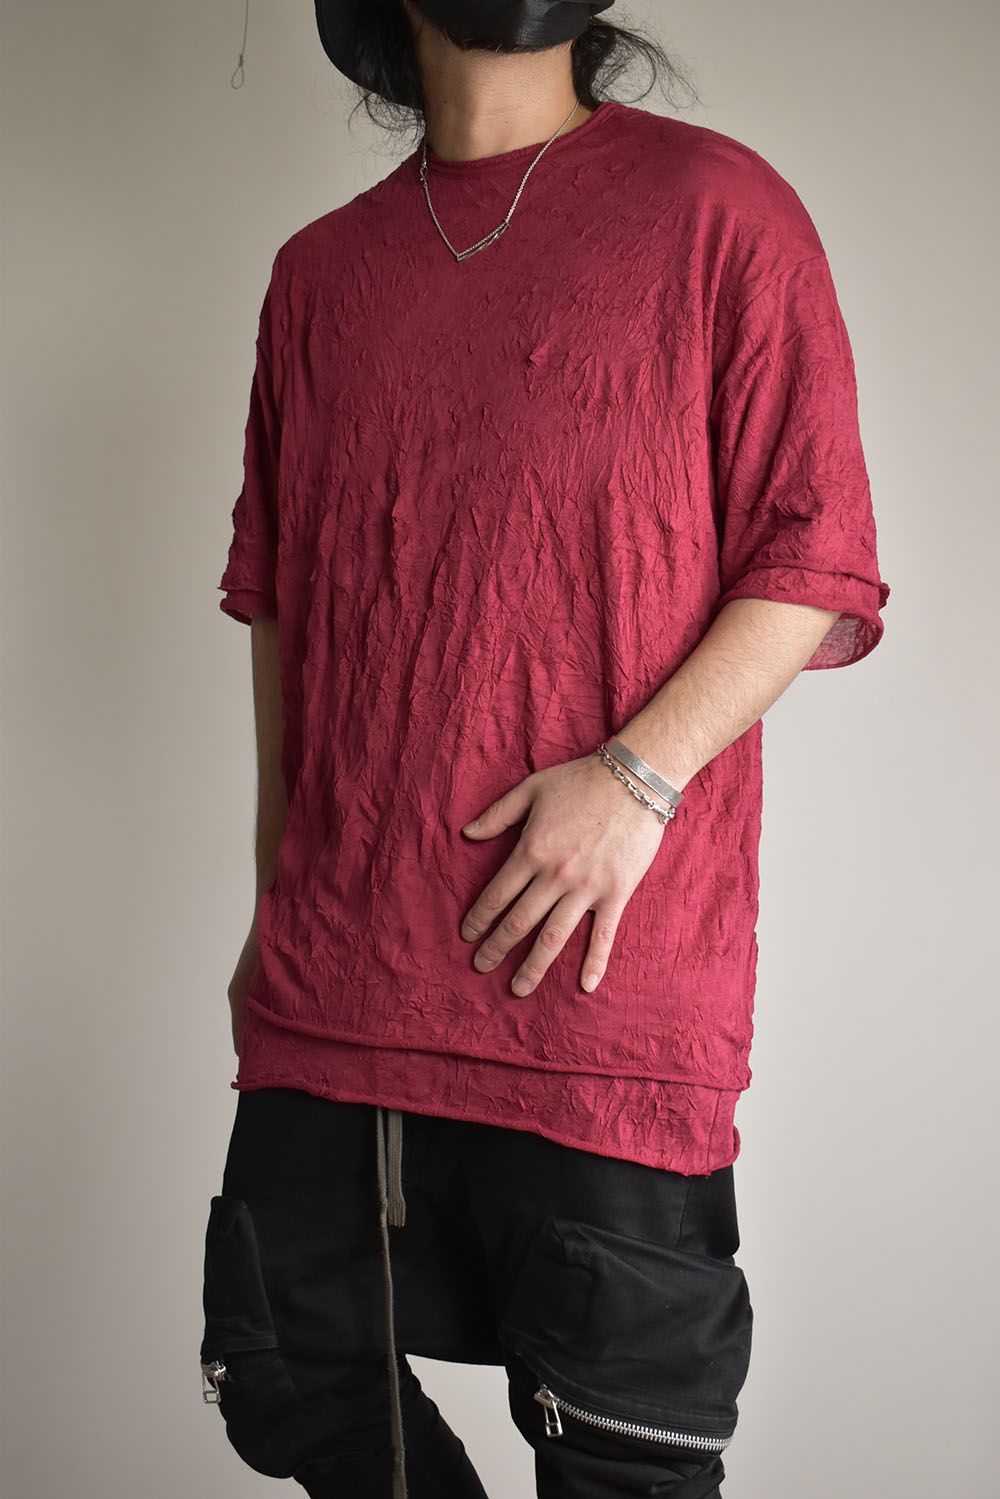 Gauze Washer Over Sized Tee"Red"/ガーゼワッシャーオーバーサイズTee"レッド"